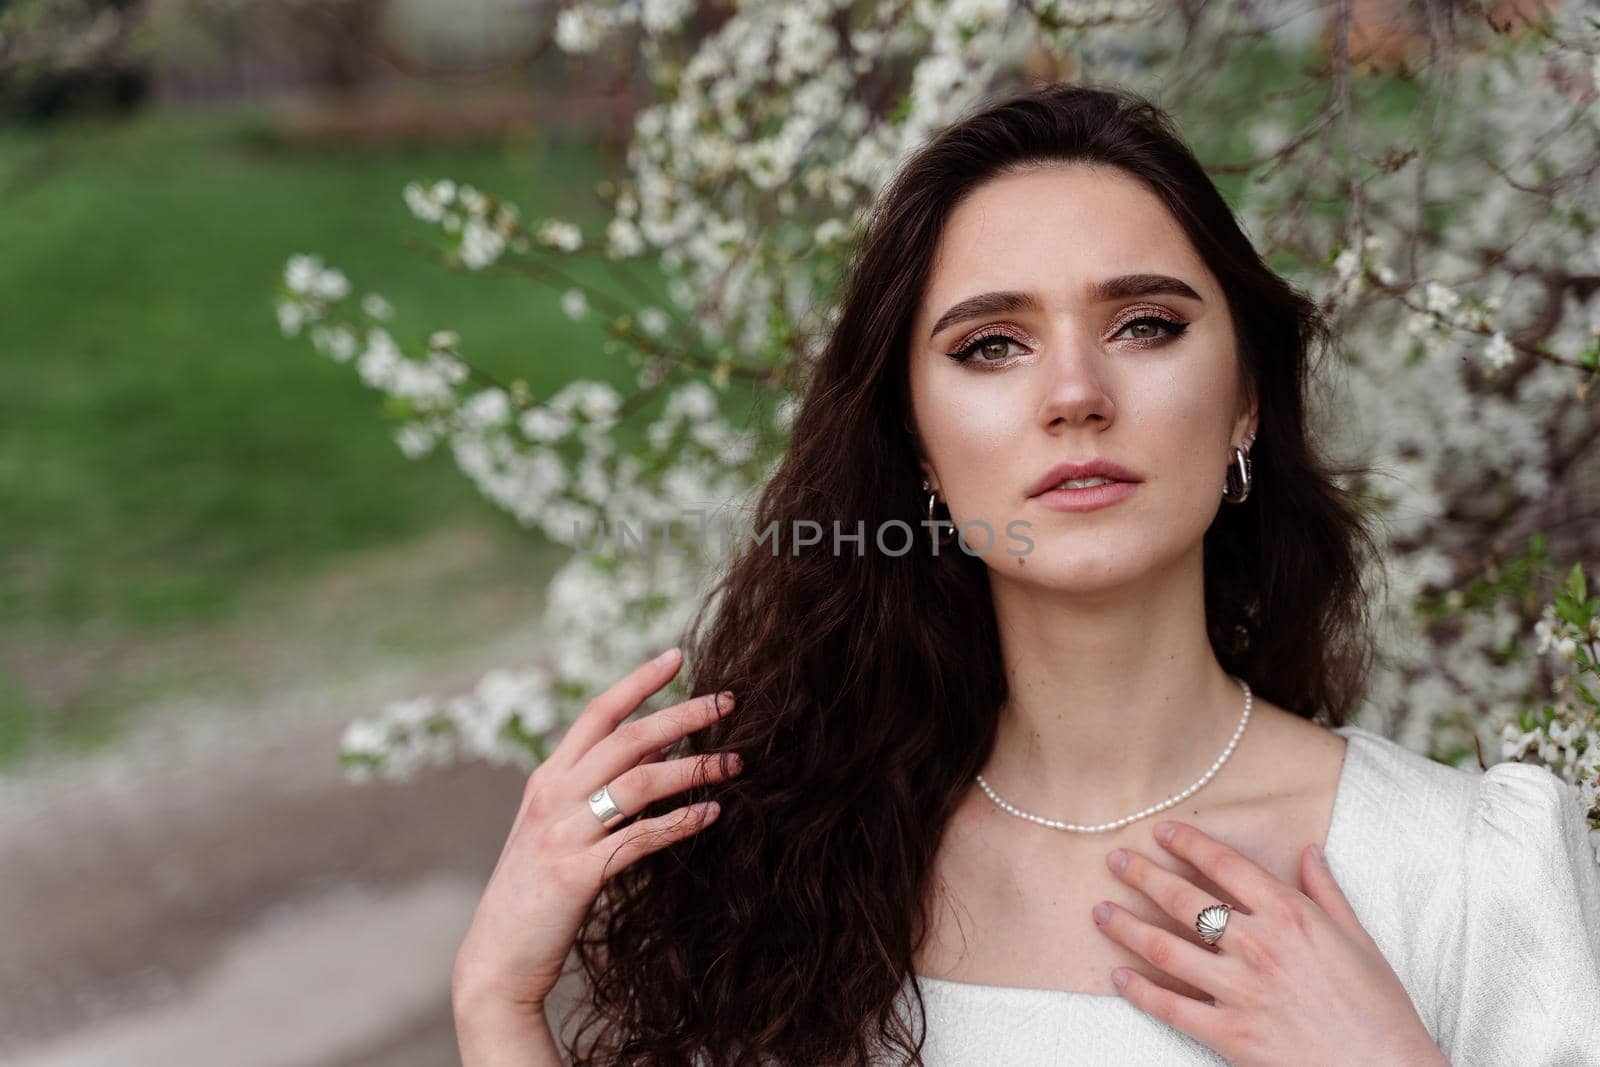 Spring lifestyle. Model posing near white blooming trees without mask outdoor countryside. Dreaming girl with curly hair